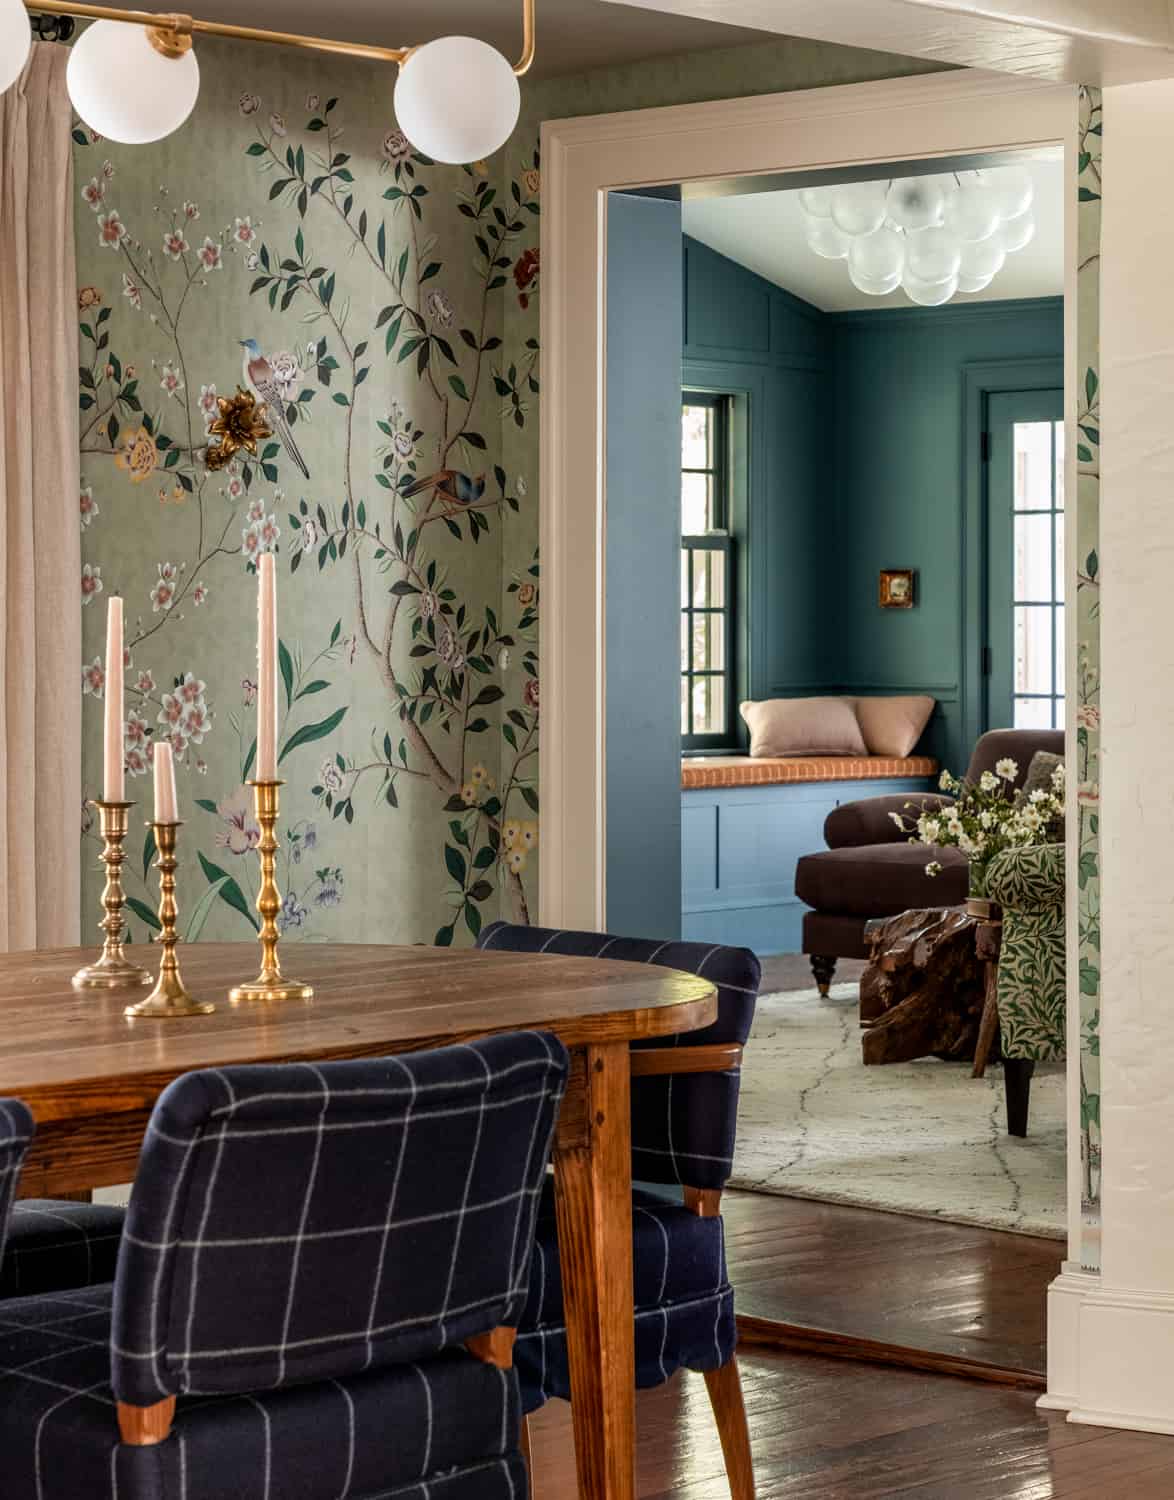 Heidi-Caillier-Design-Hudson-Valley-house-dining-room-old-beams-degournay-wallpaper-Nordroom